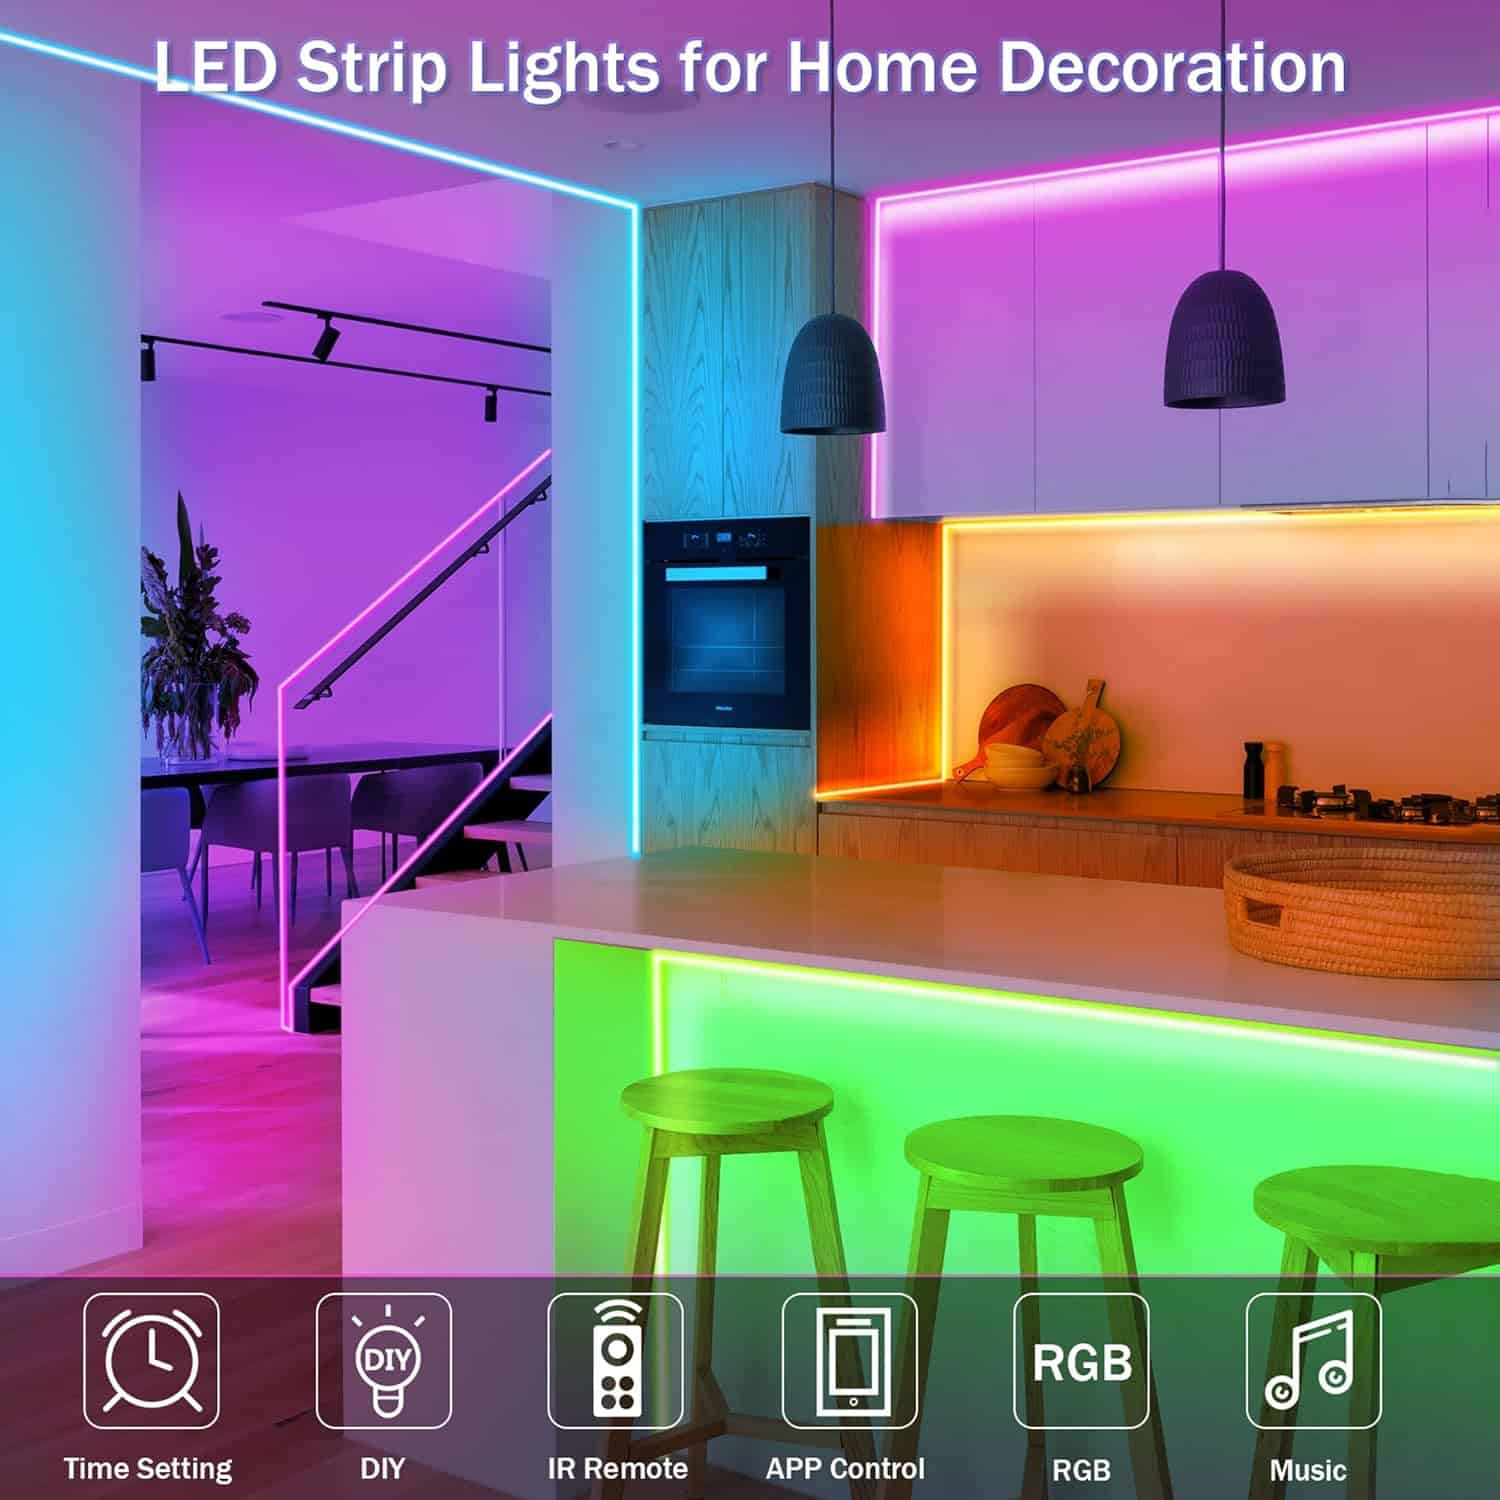 KEELIXIN 65.6ft LED Lights for Bedroom, Music Sync RGB LED Strip Lights with APP  Remote Control, Luces LED para Cuarto, Bluetooth LED Lights for Room, Home Decoration